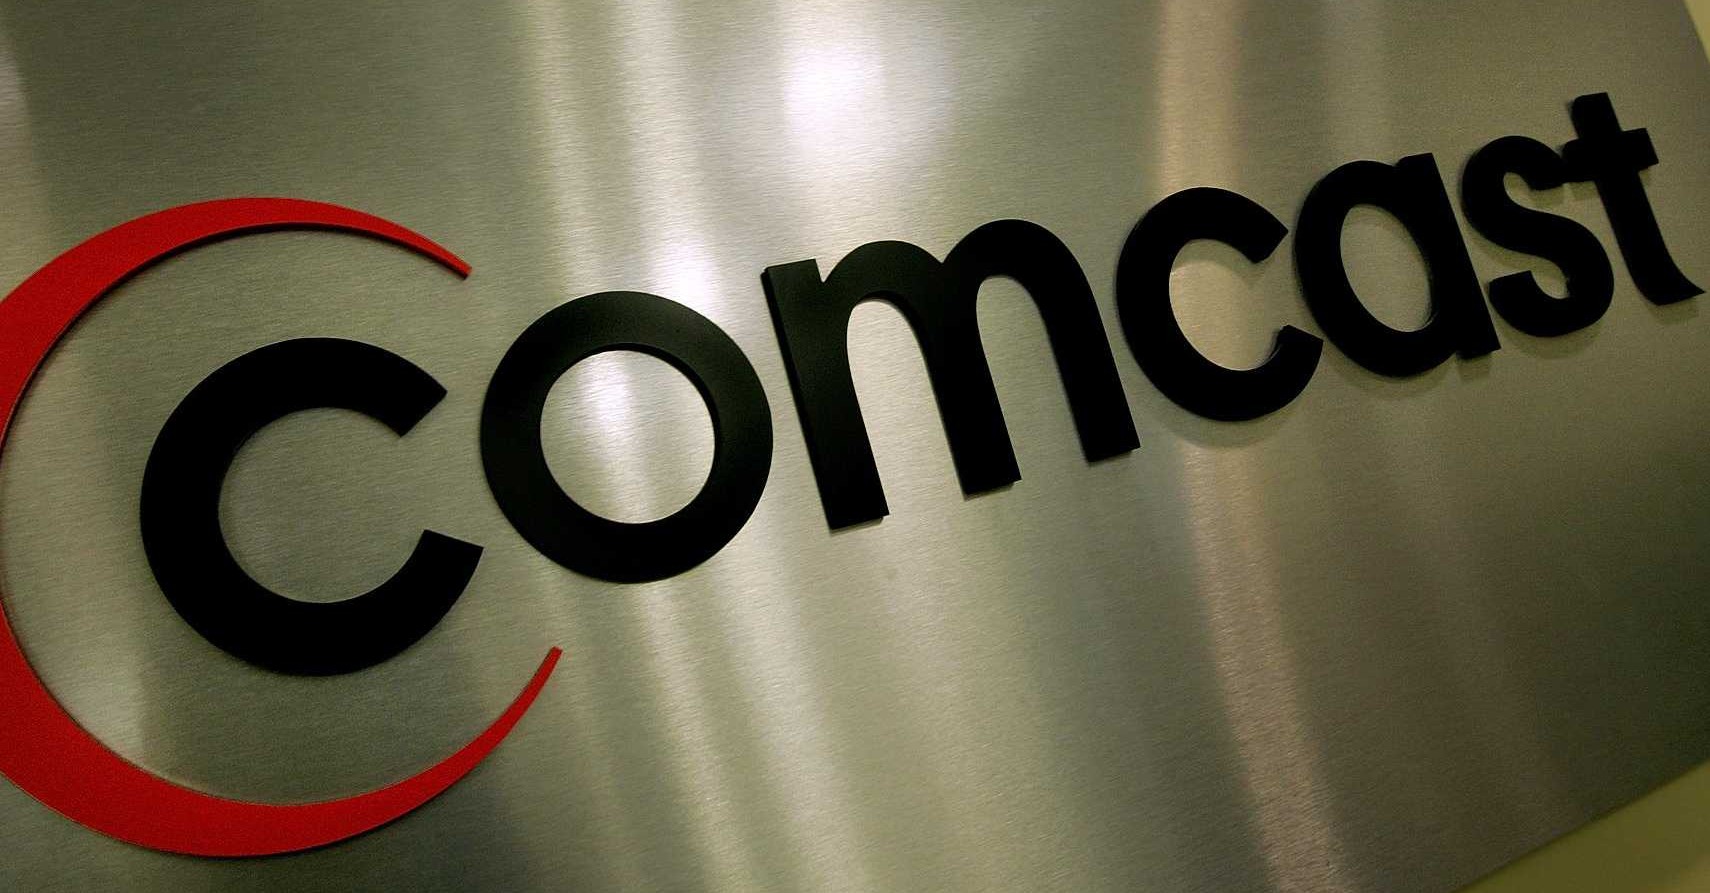 Comcast Wants to Expand Its Internet Service to New Markets & Will Spend $42.45 Billion To Do So